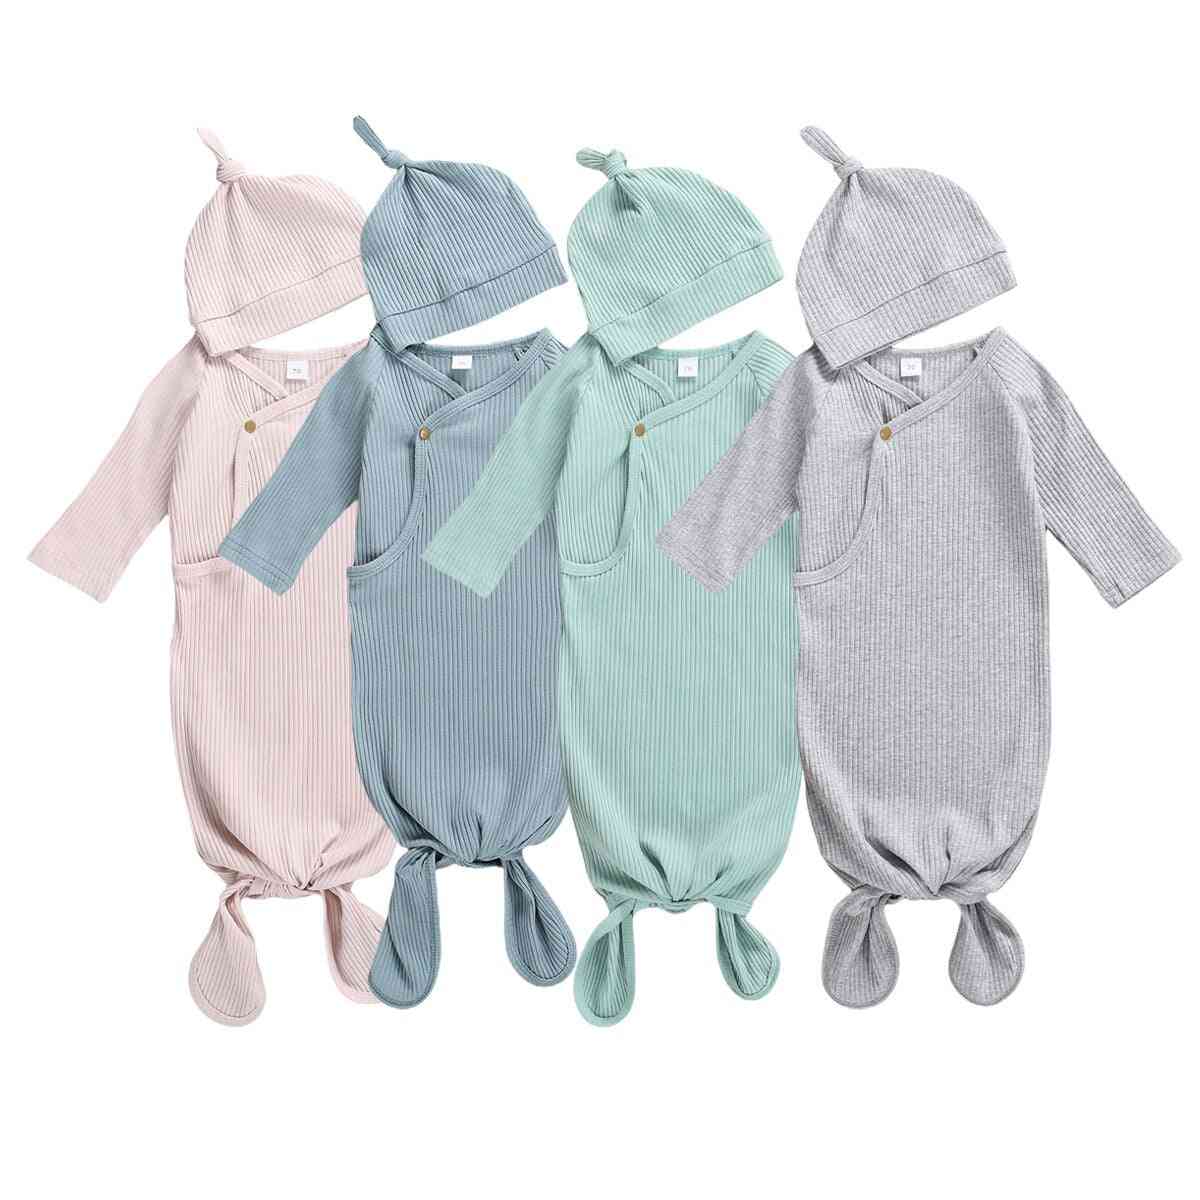 Newborn Baby Girl Solid Knitted Swaddle Wrap Blanket Sleeping Bag+hat Set